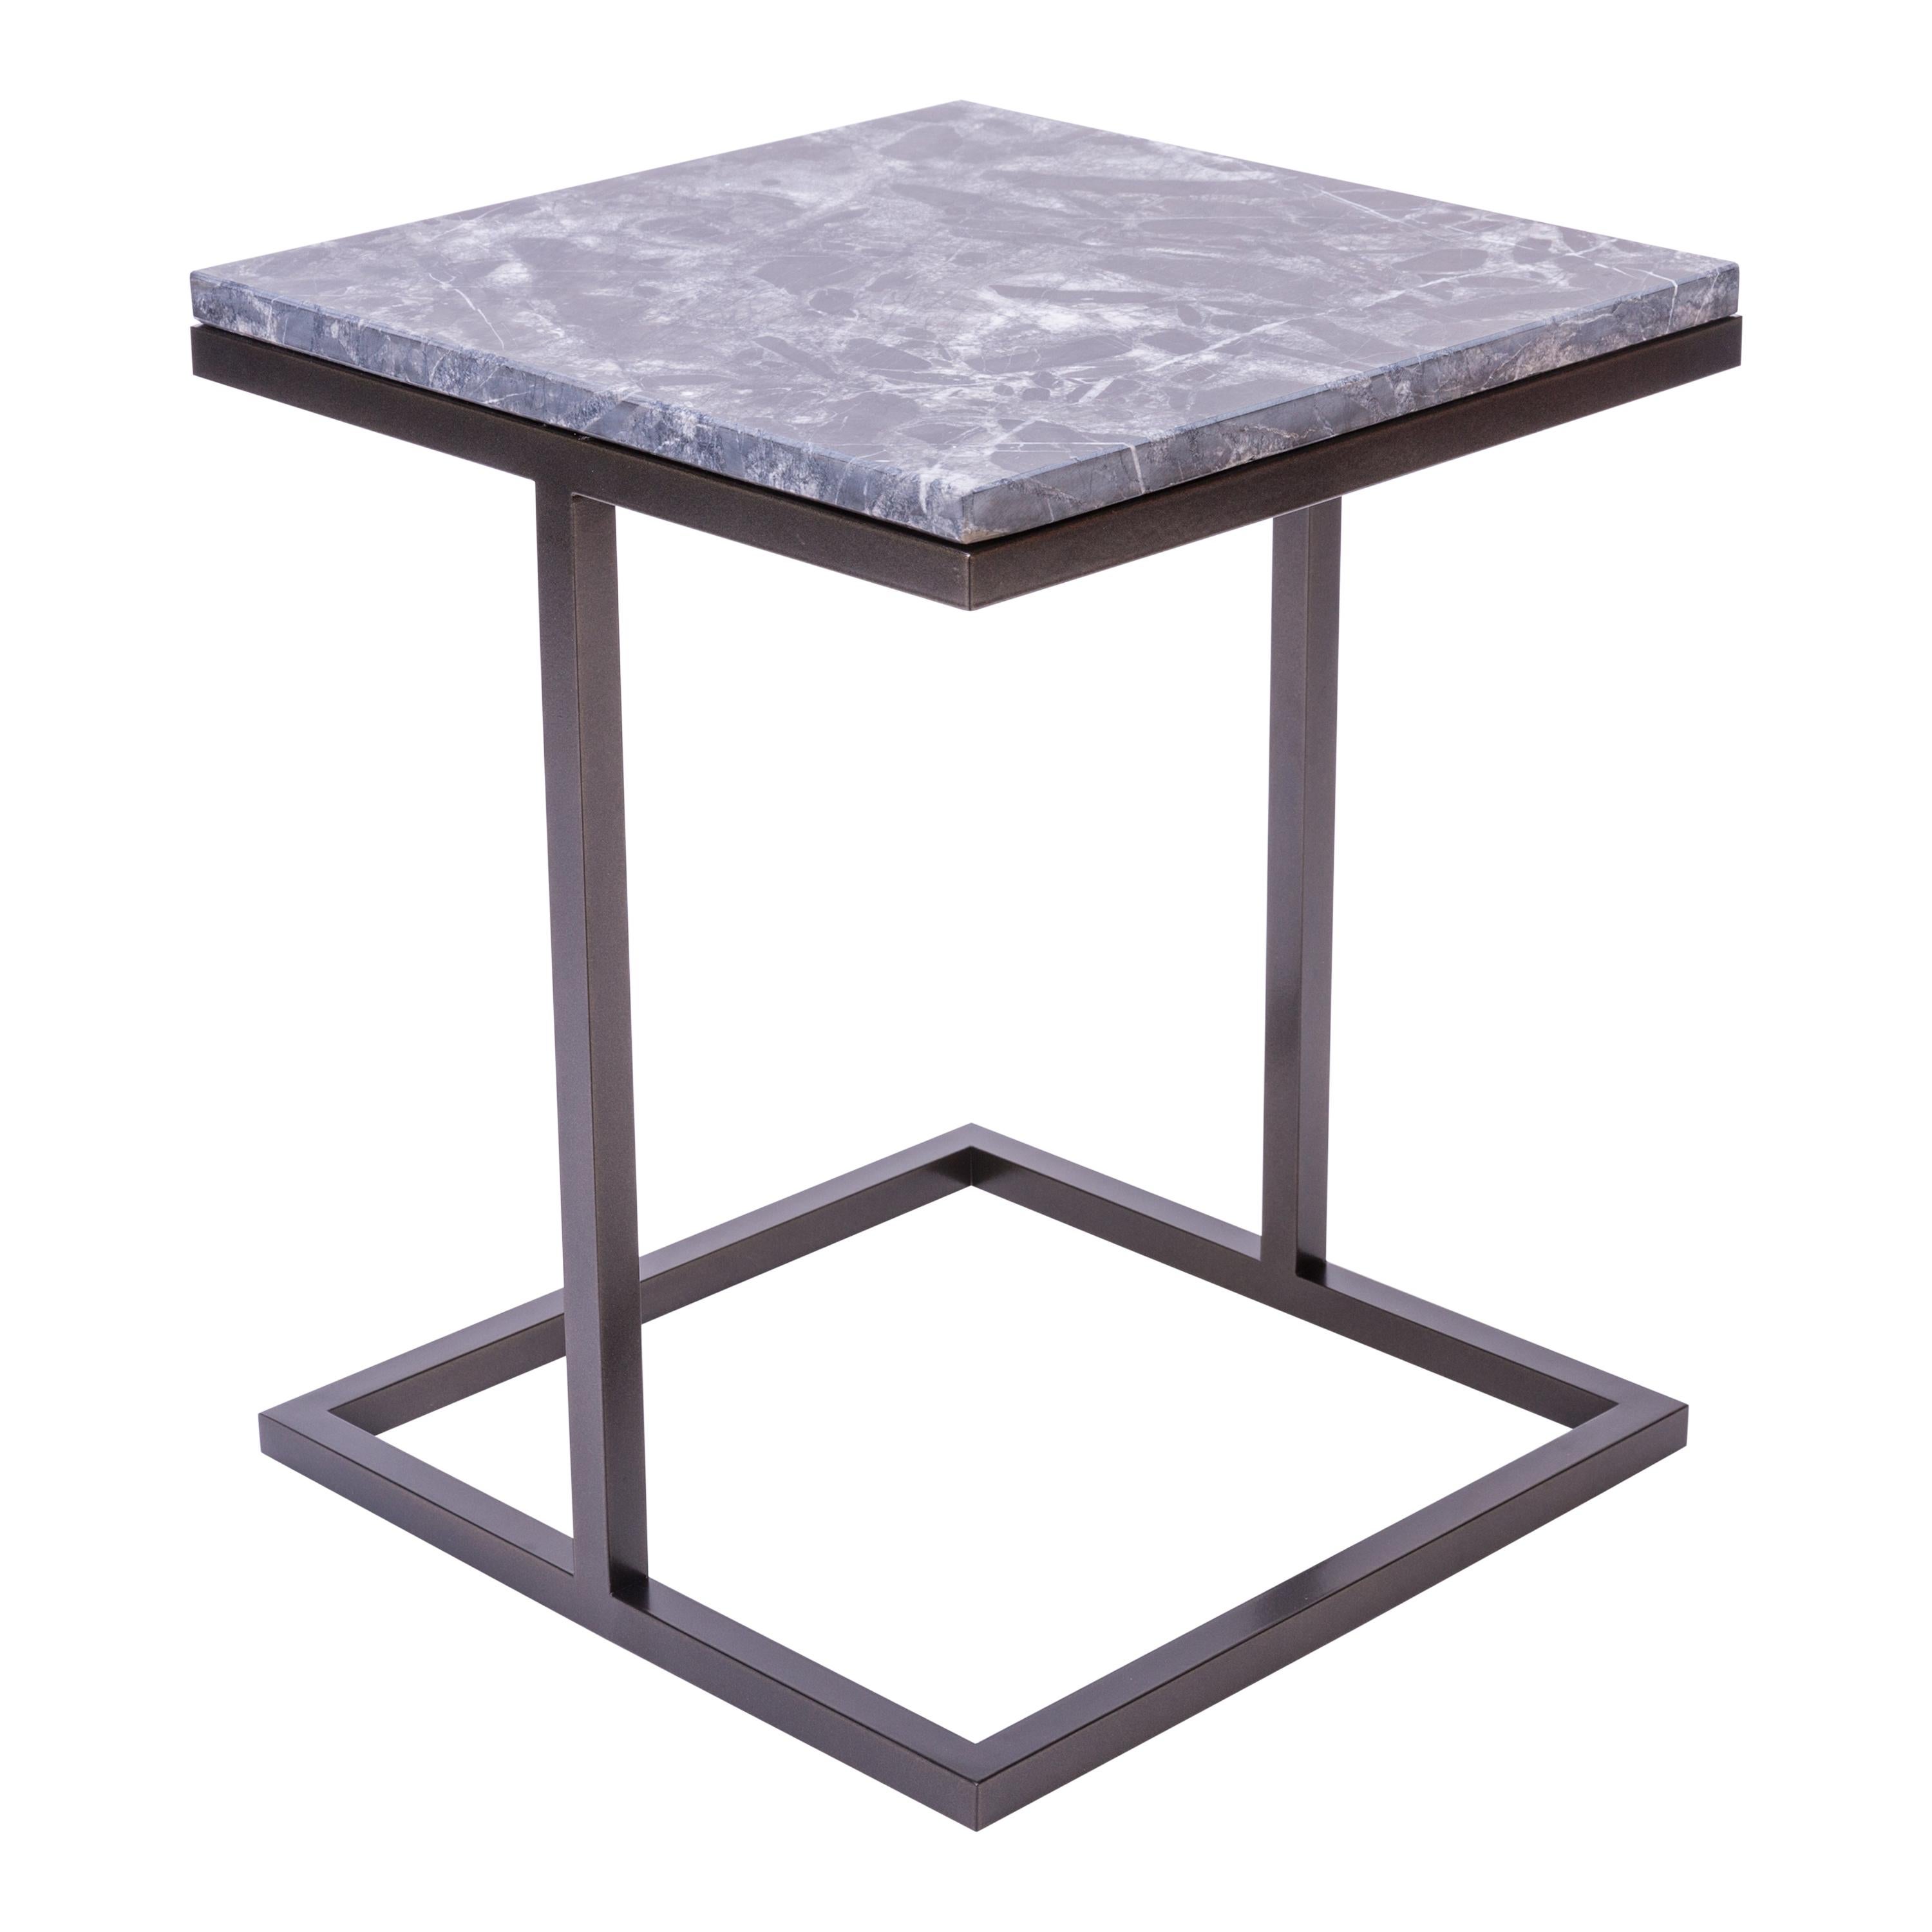 Bacco Squared Coffee Table in Grey Marble and Powder Coated Steel